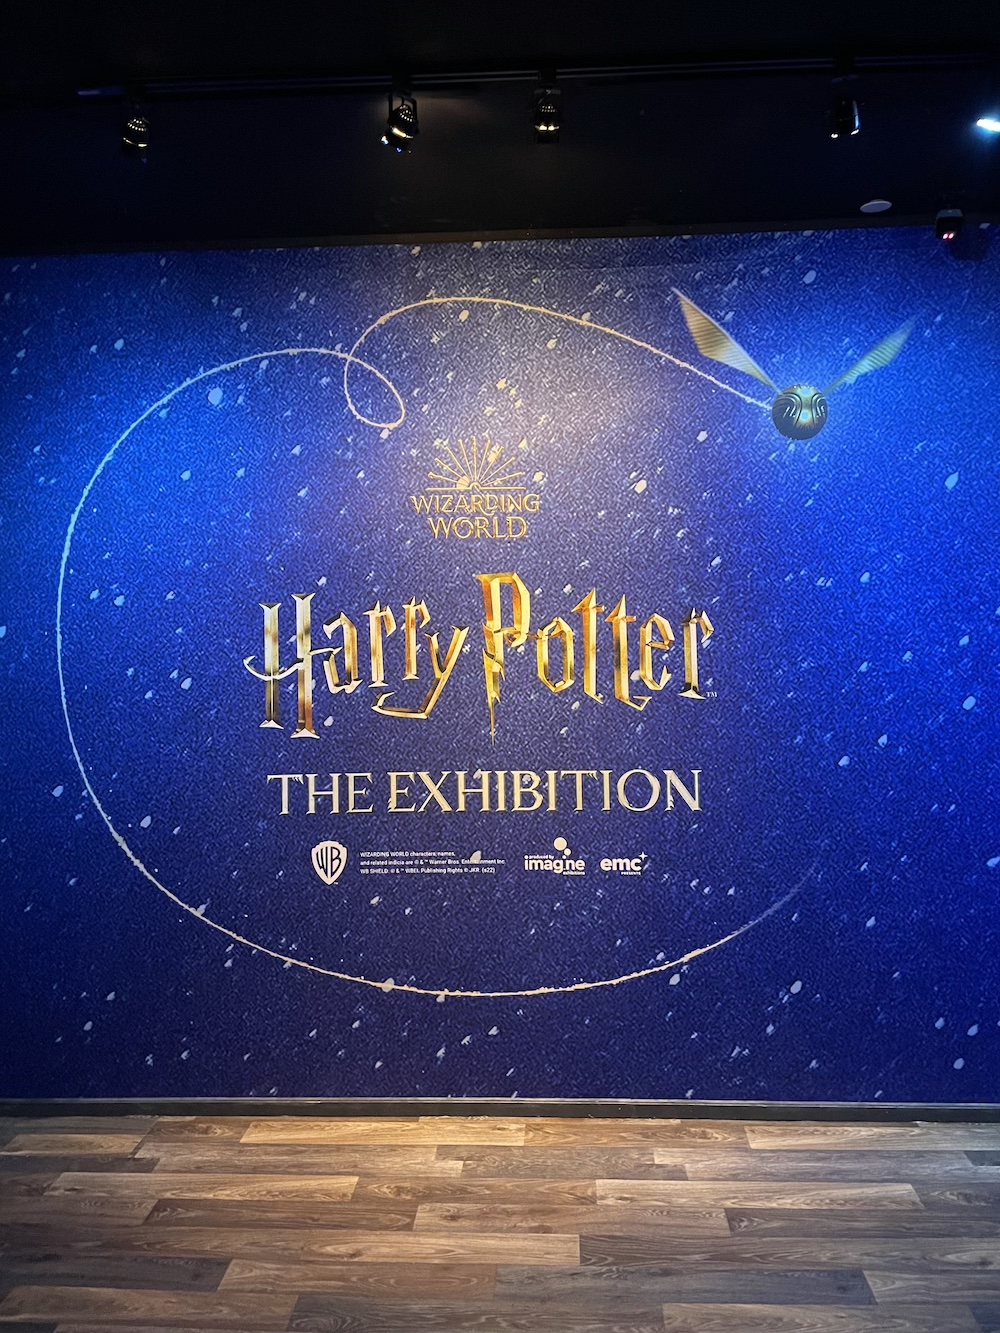 Sign at the beginning of “Harry Potter: The Exhibition”